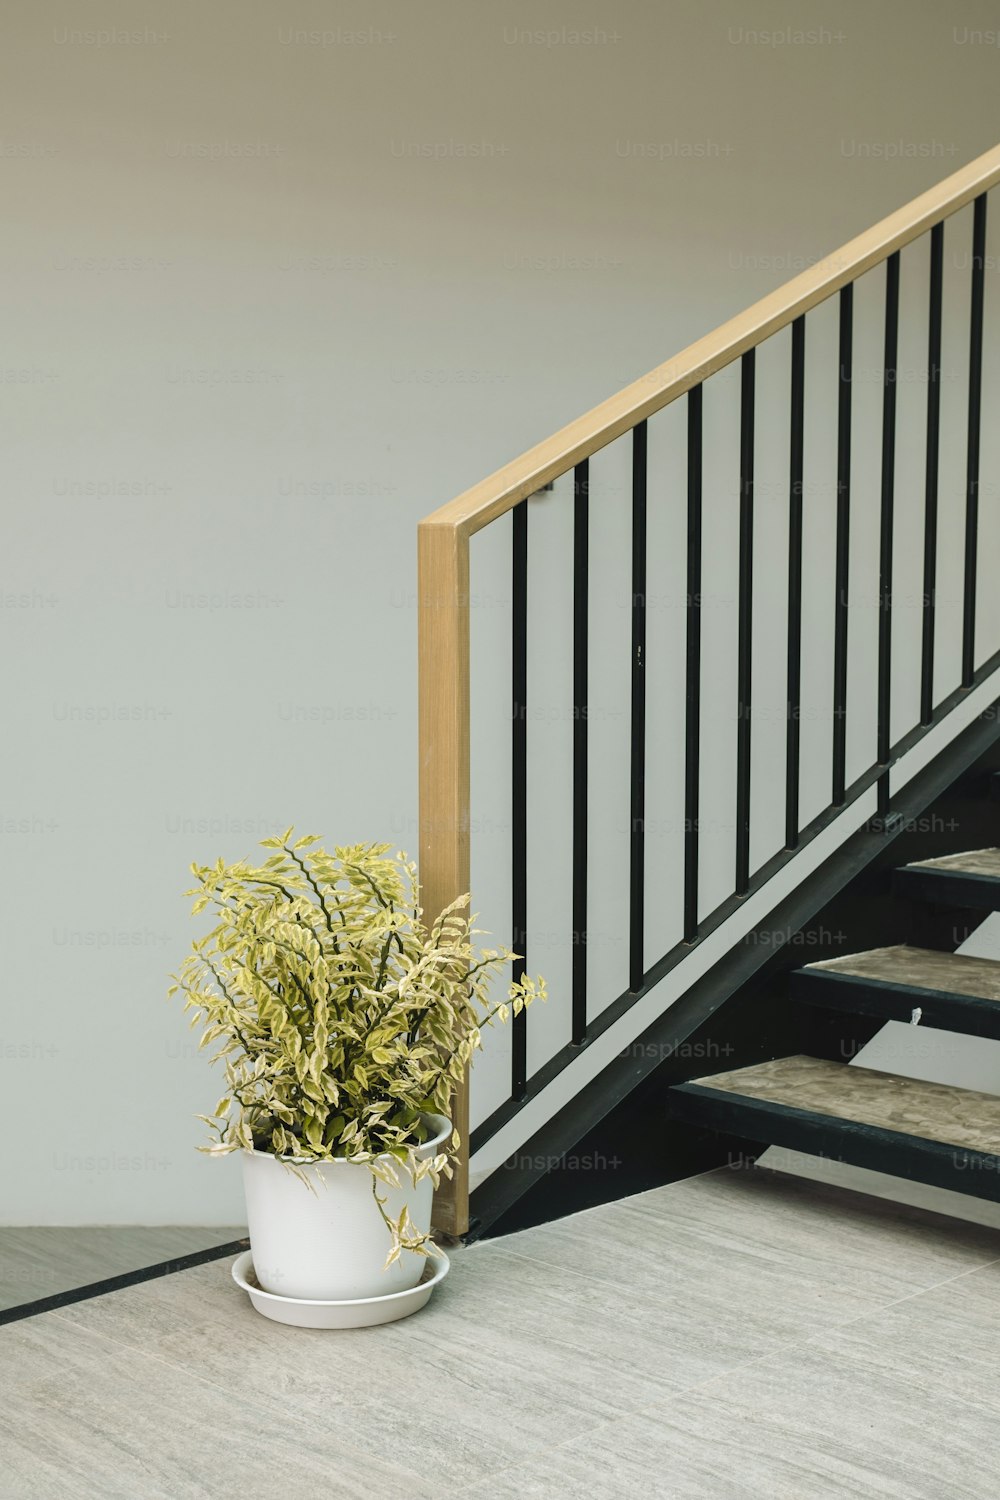 a potted plant sitting on the ground next to a stair case